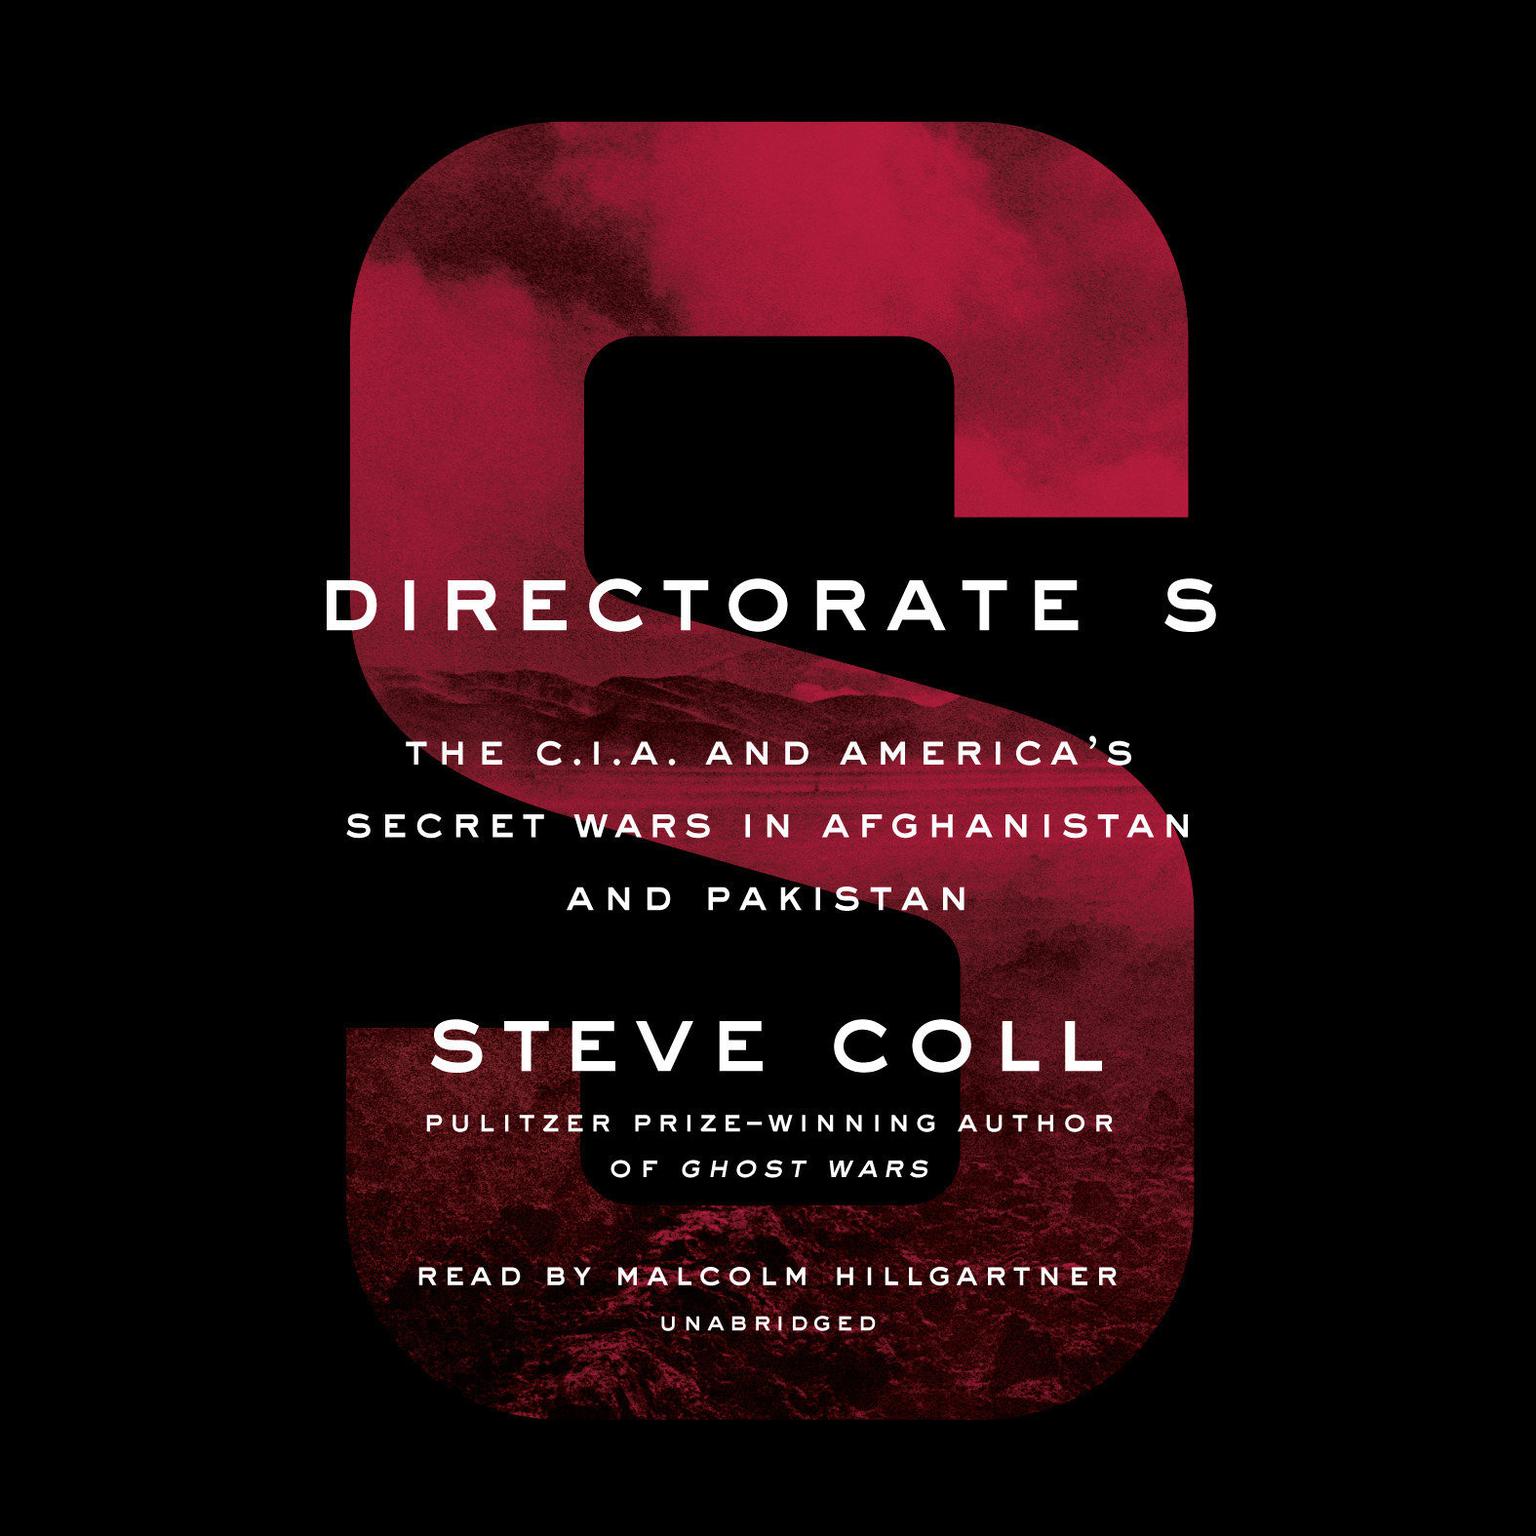 Directorate S: The C.I.A. and America’s Secret Wars in Afghanistan and Pakistan Audiobook, by Steve Coll